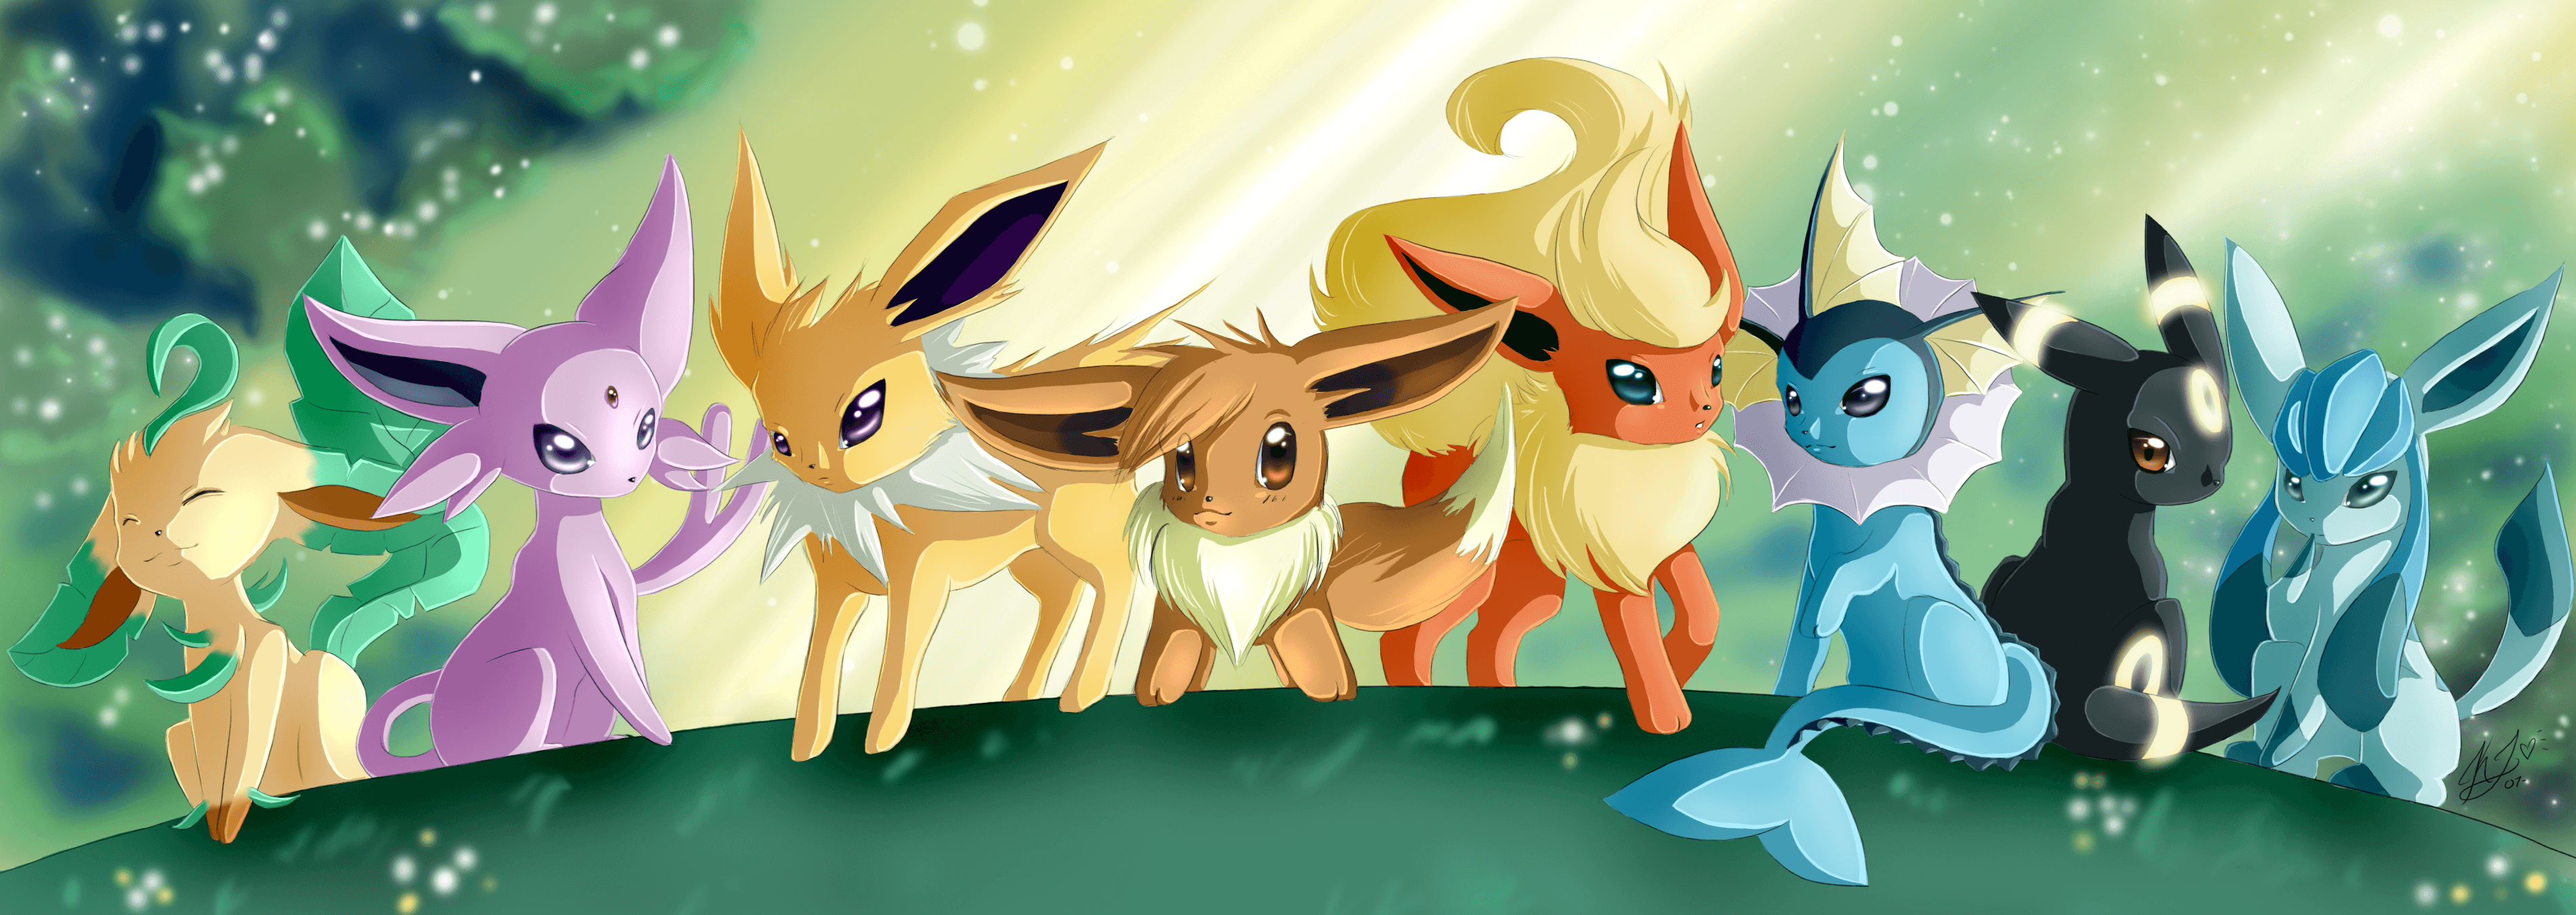 Leafeon (Pokémon) HD Wallpaper and Background Image